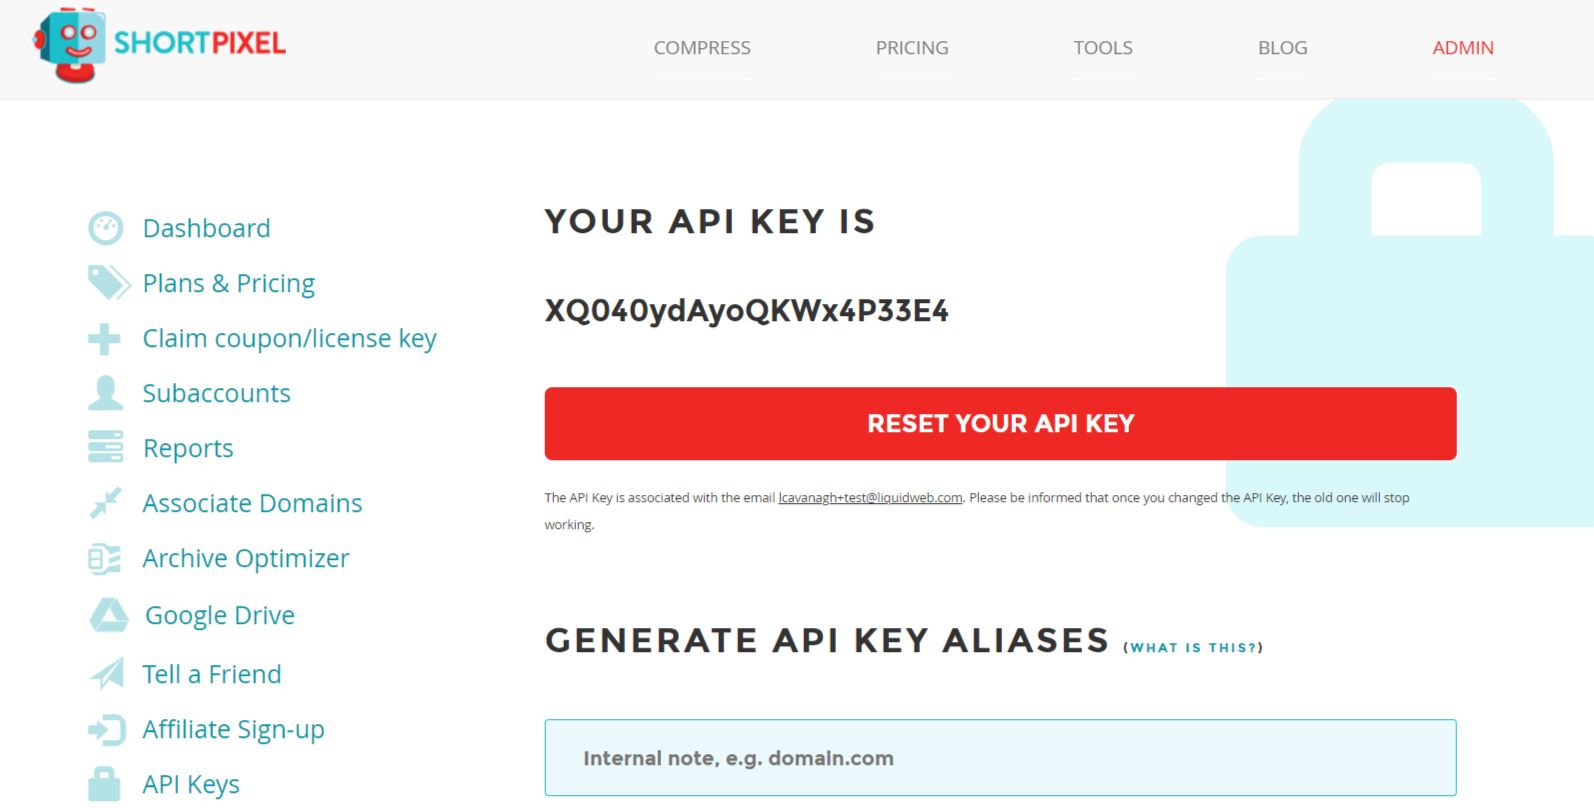 To find your API key you will need to login into your ShortPixel account and then go to the dashboard in the API keys section. 